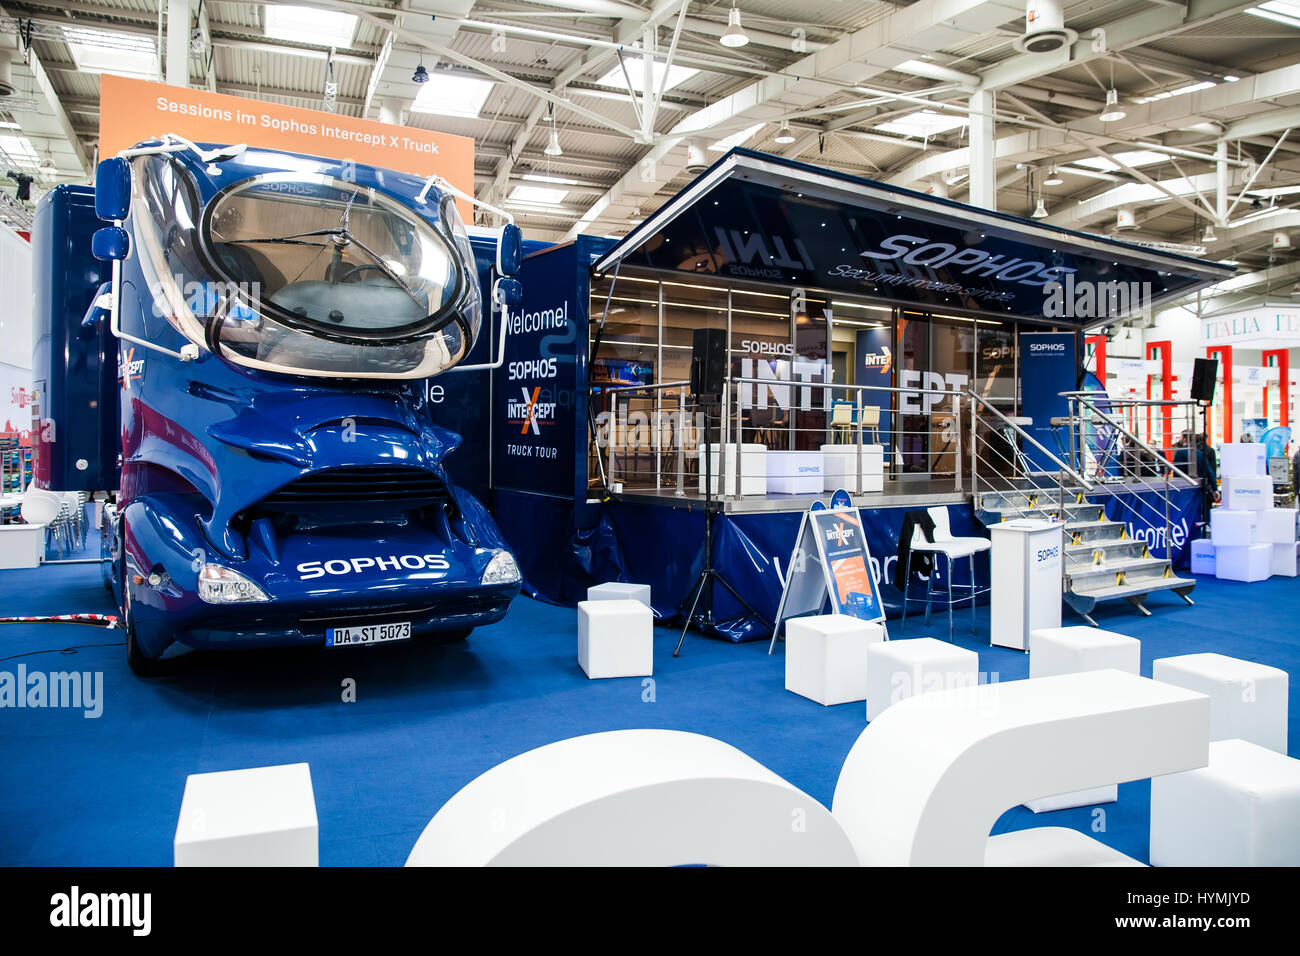 Sophos Next-gen ceber security company stand interior on exhibition Cebit 2017 in Hannover Messe, Germany Stock Photo